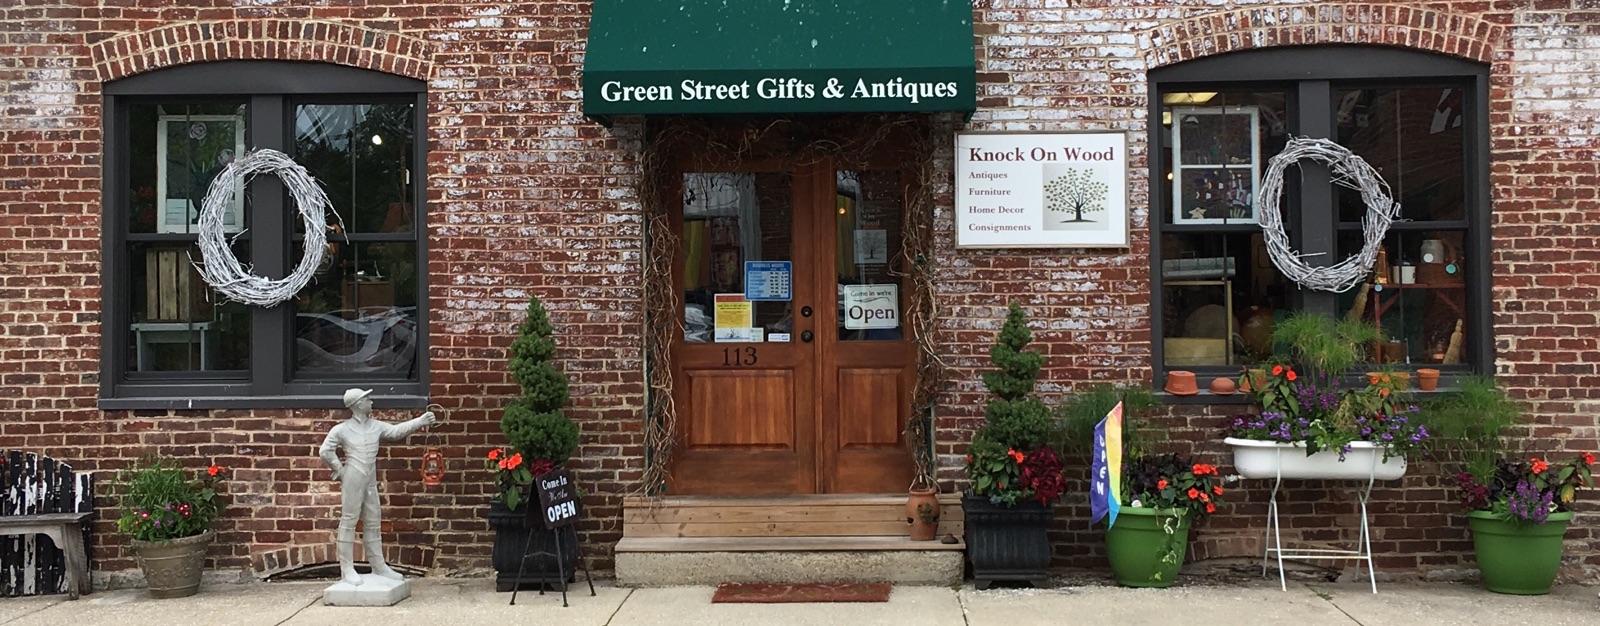 Green Street Gifts & Antiques